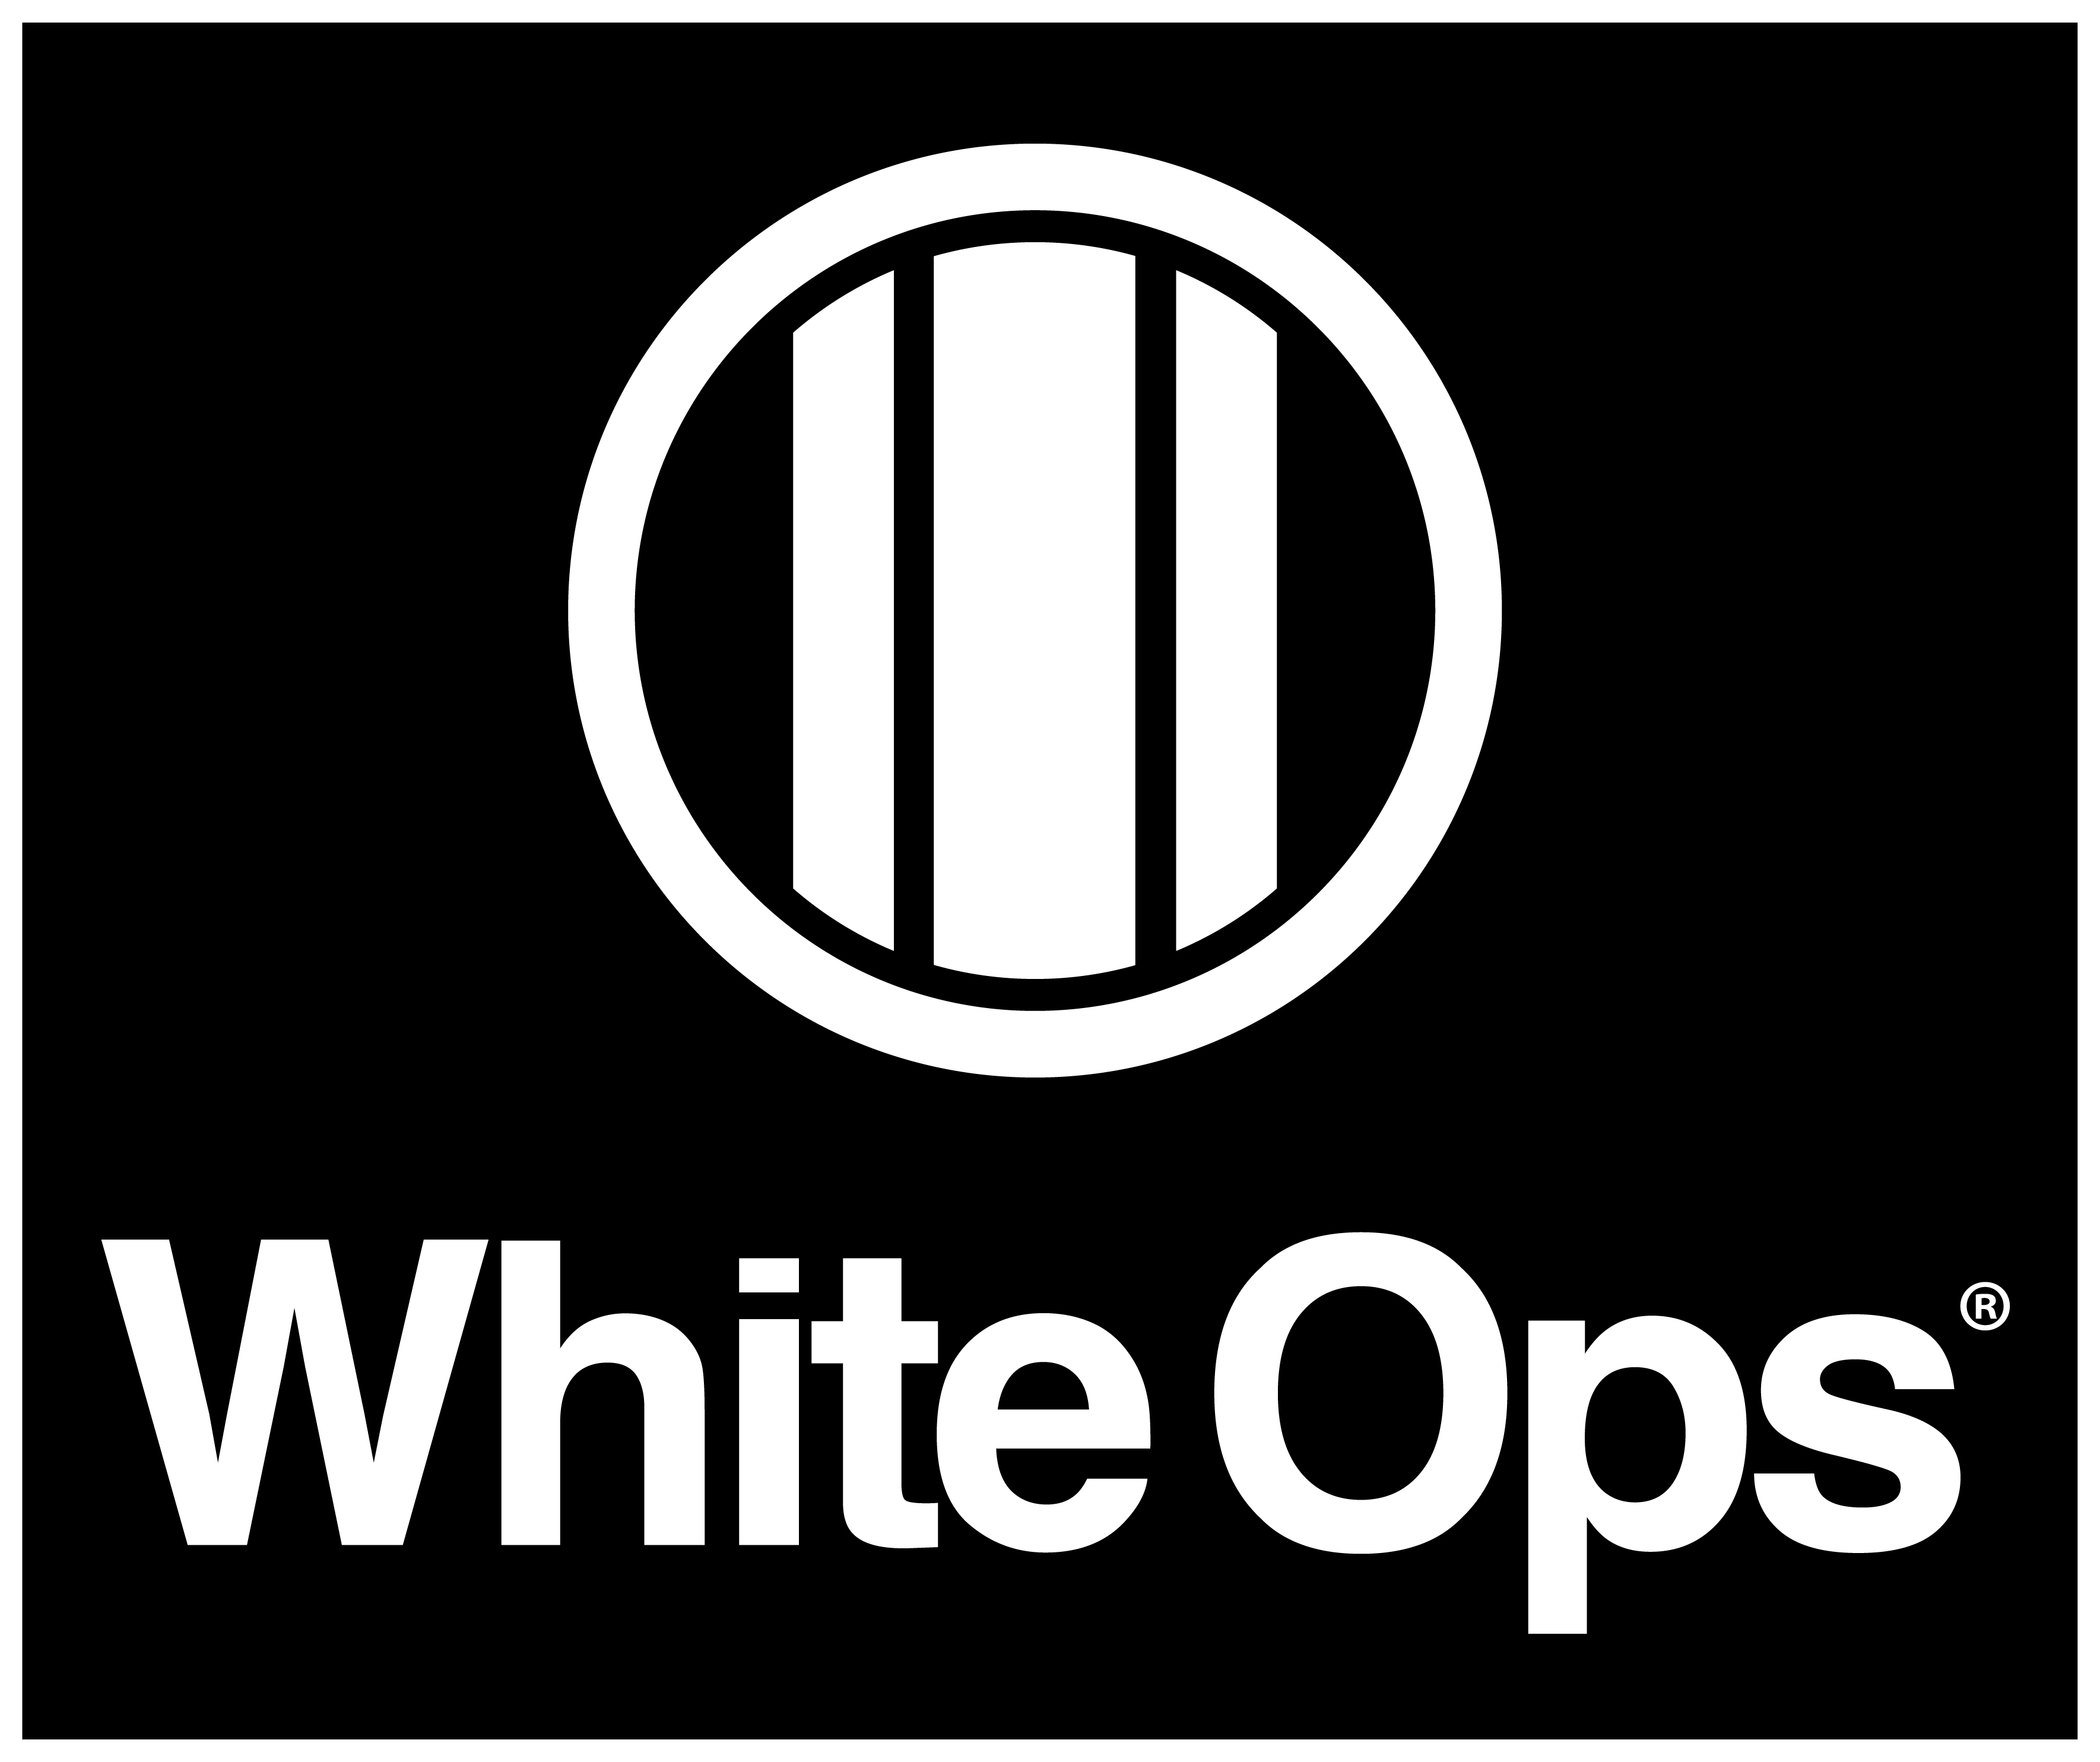 White Ops Announces Acquisition By Goldman Sachs Merchant Banking Clearsky Security And Nightdragon Business Wire